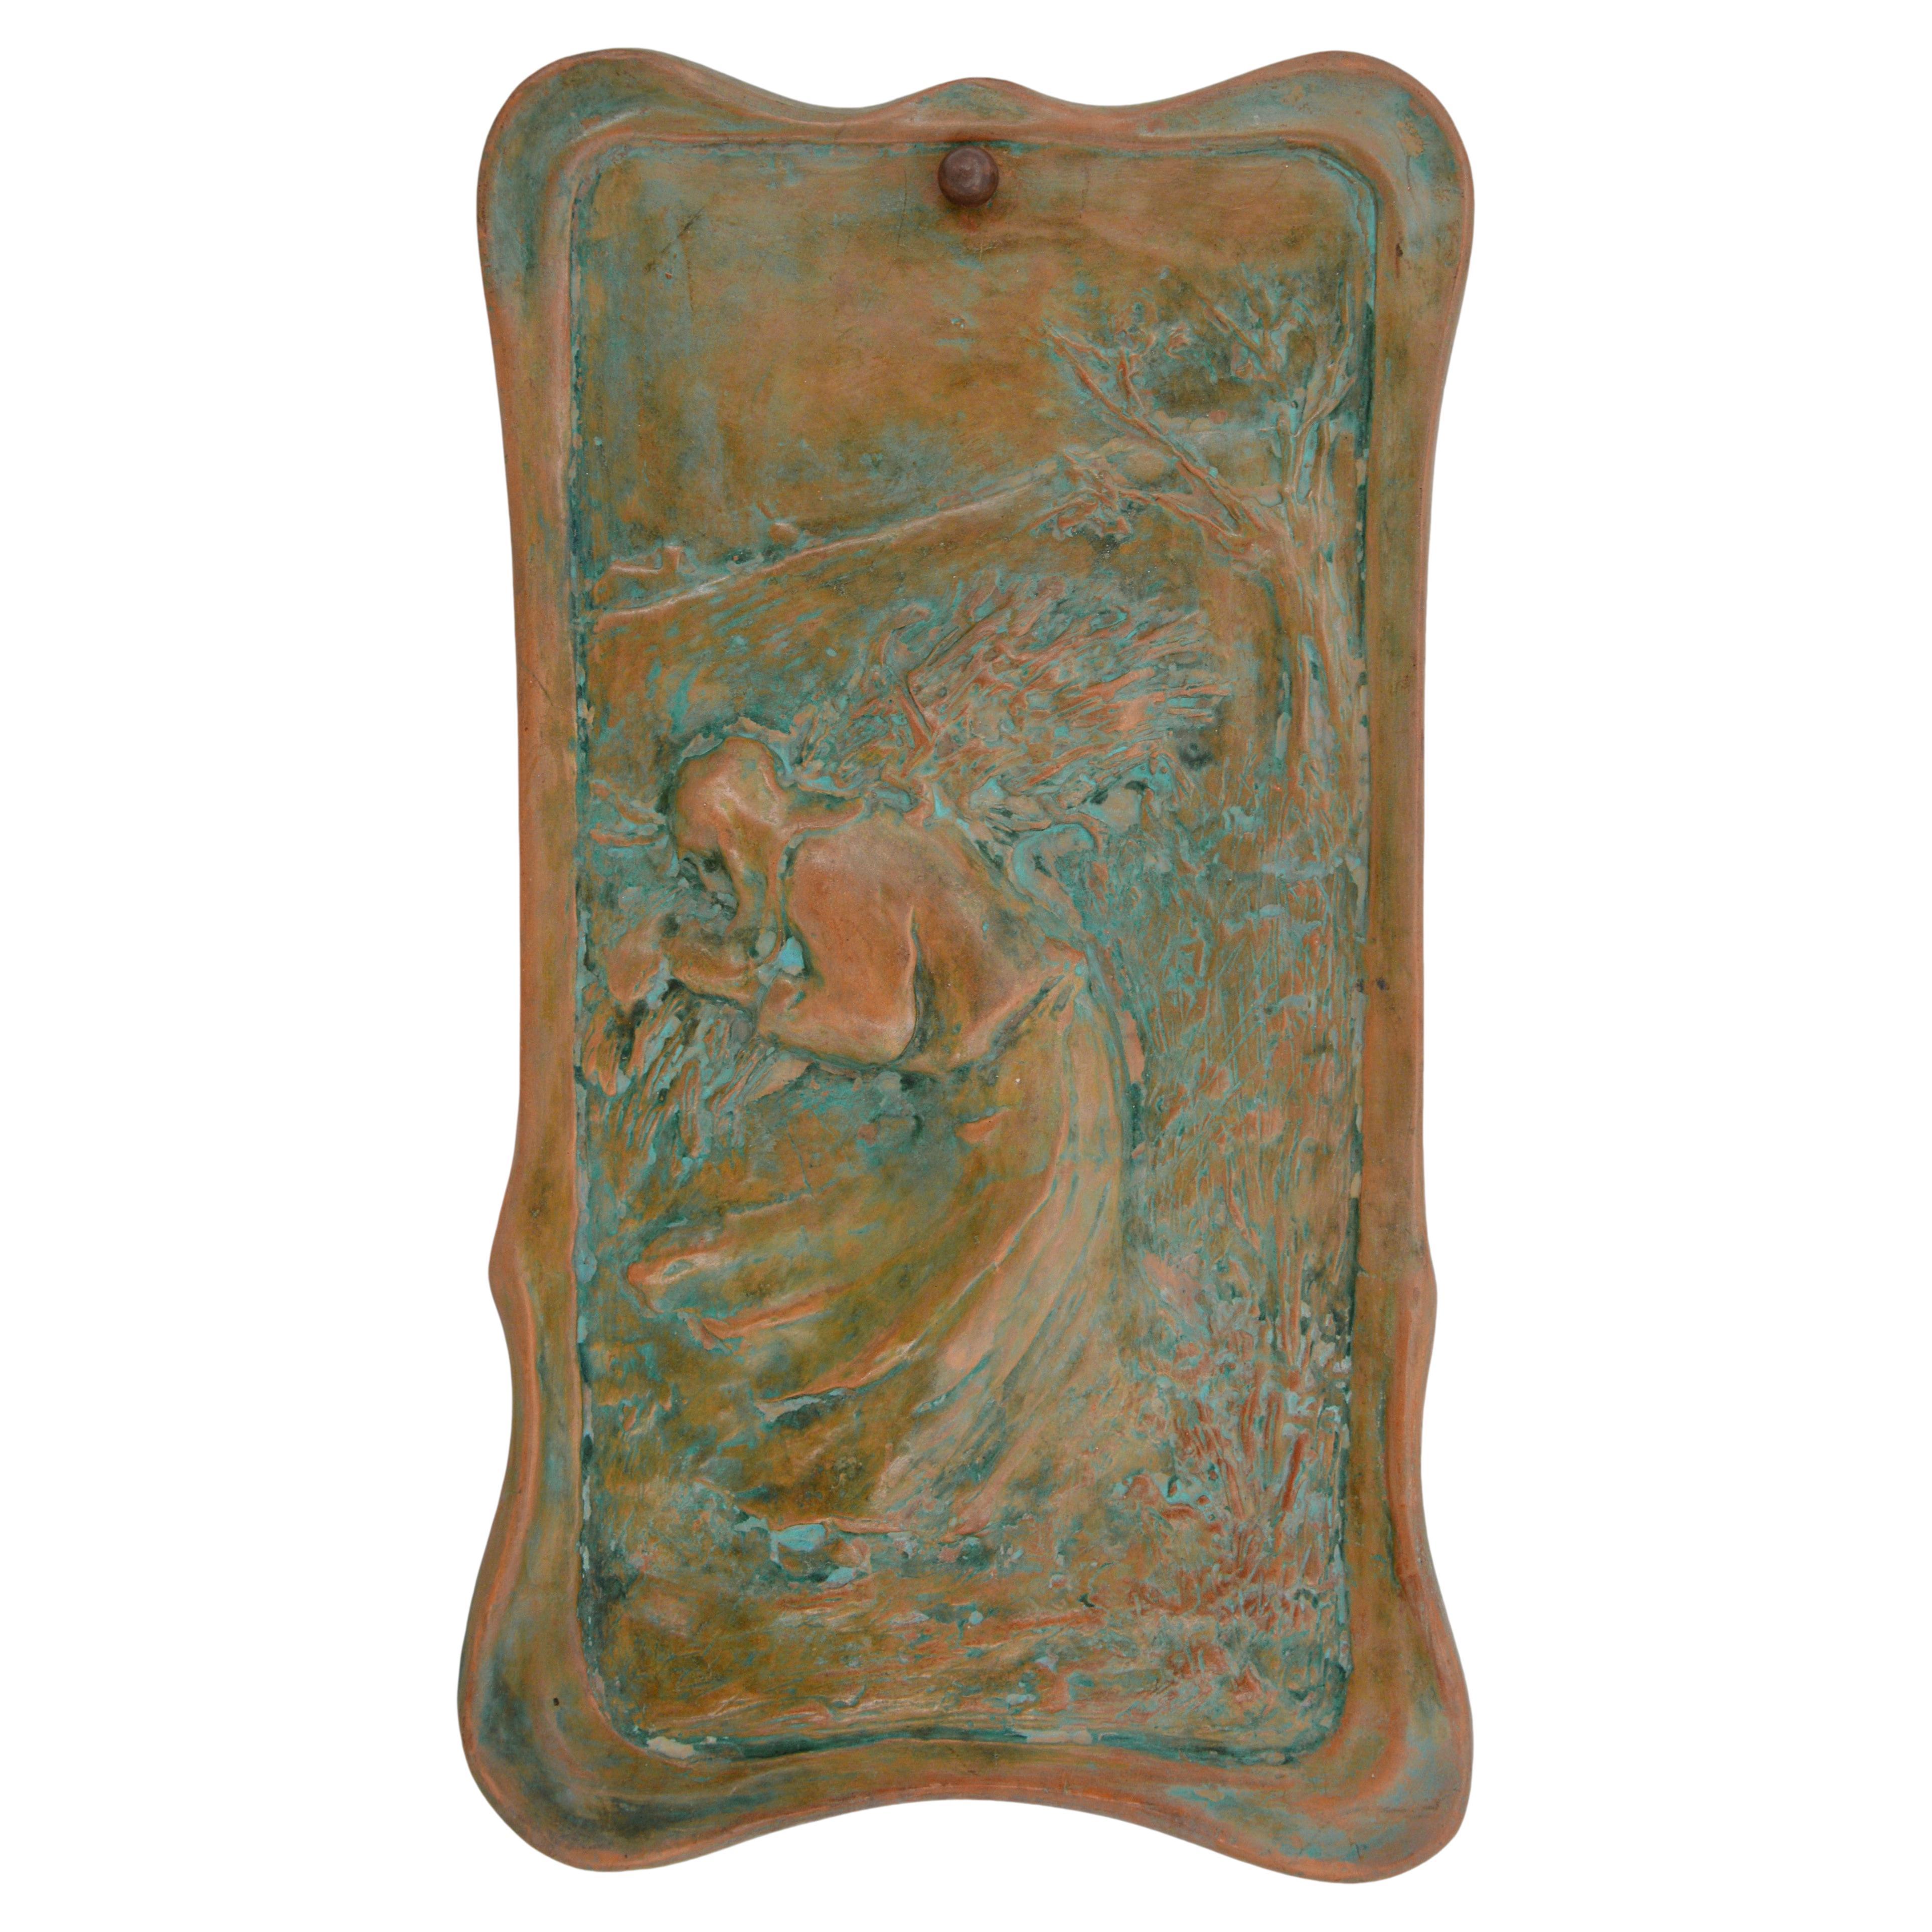 French Art Nouveau Terracotta Wall Plaque, Early 20th Century